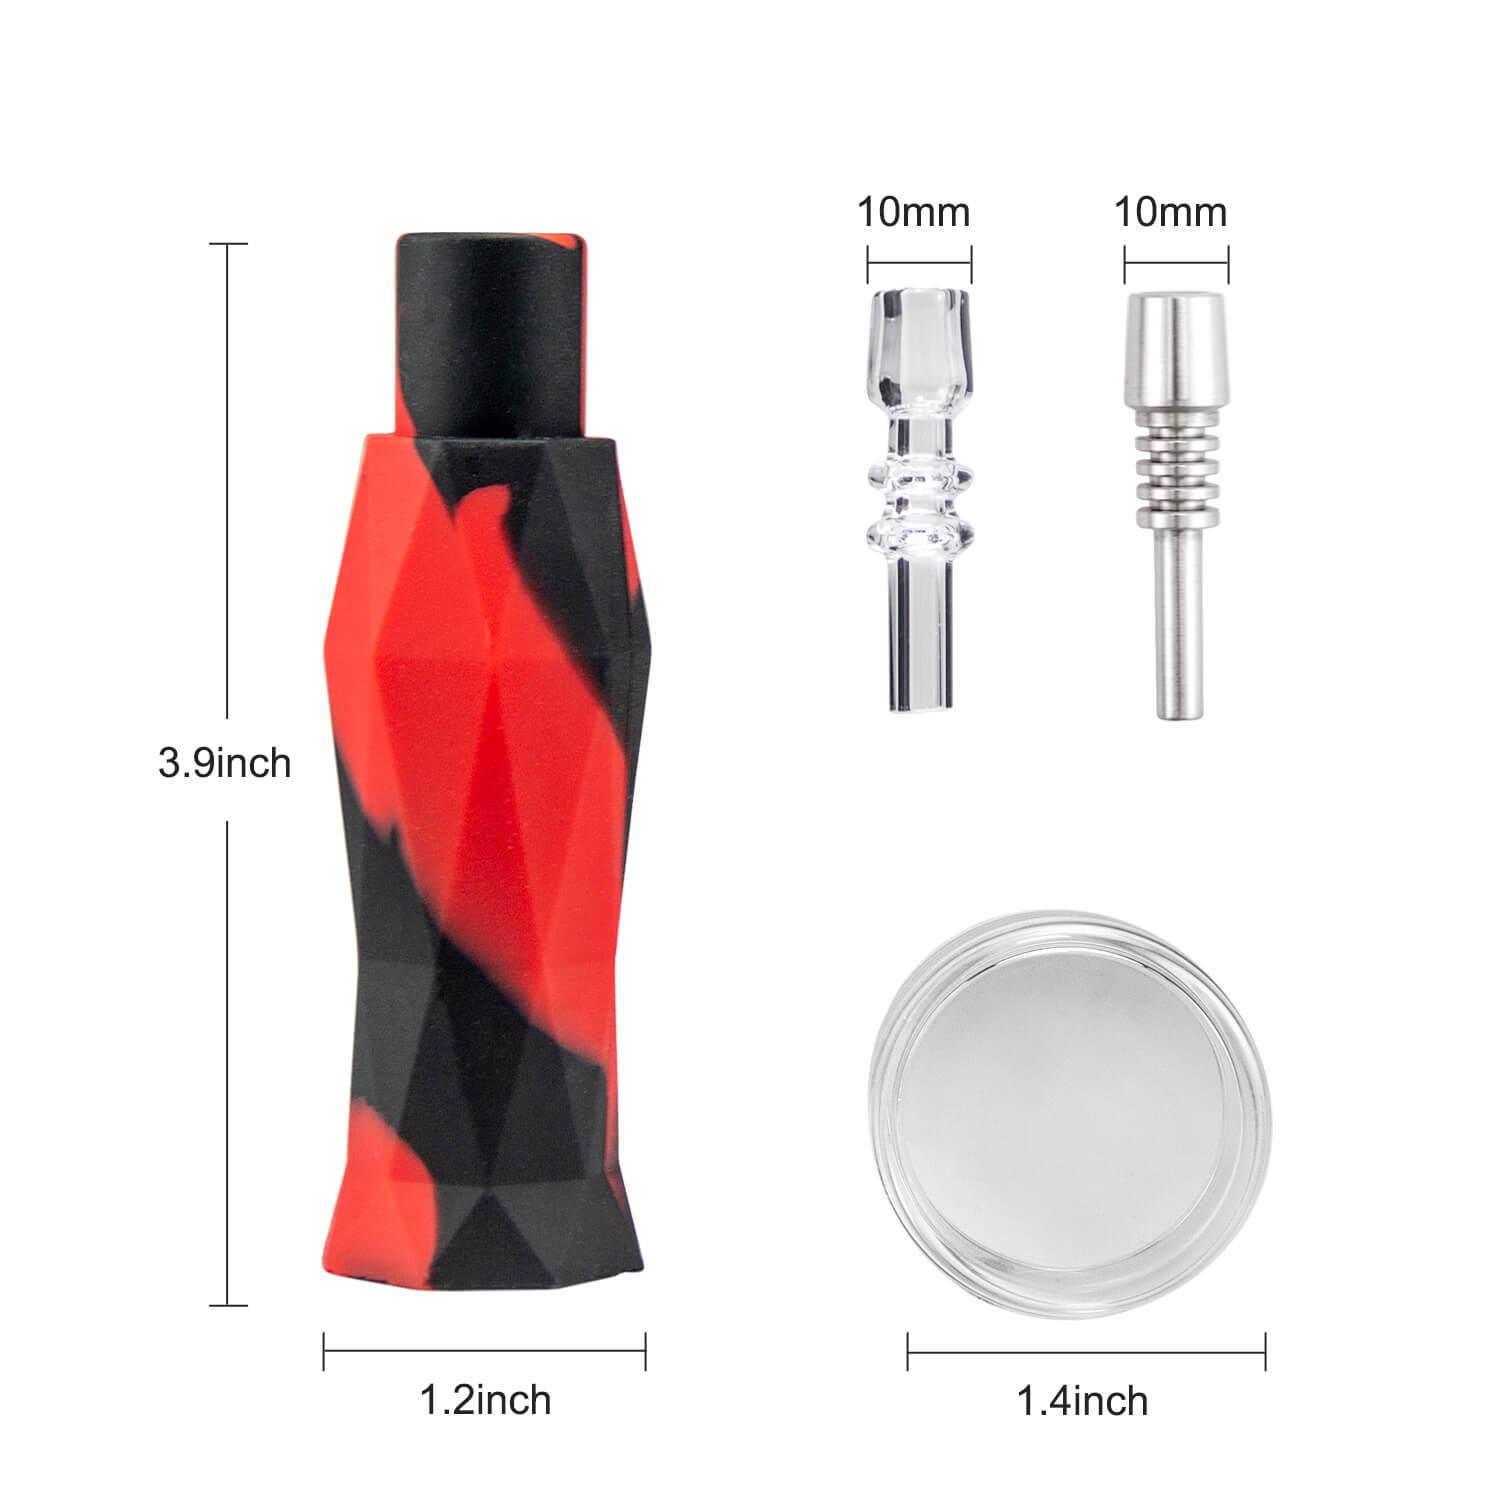 Silicone Nectar Collector Honey Straw kit - PILOT DIARY